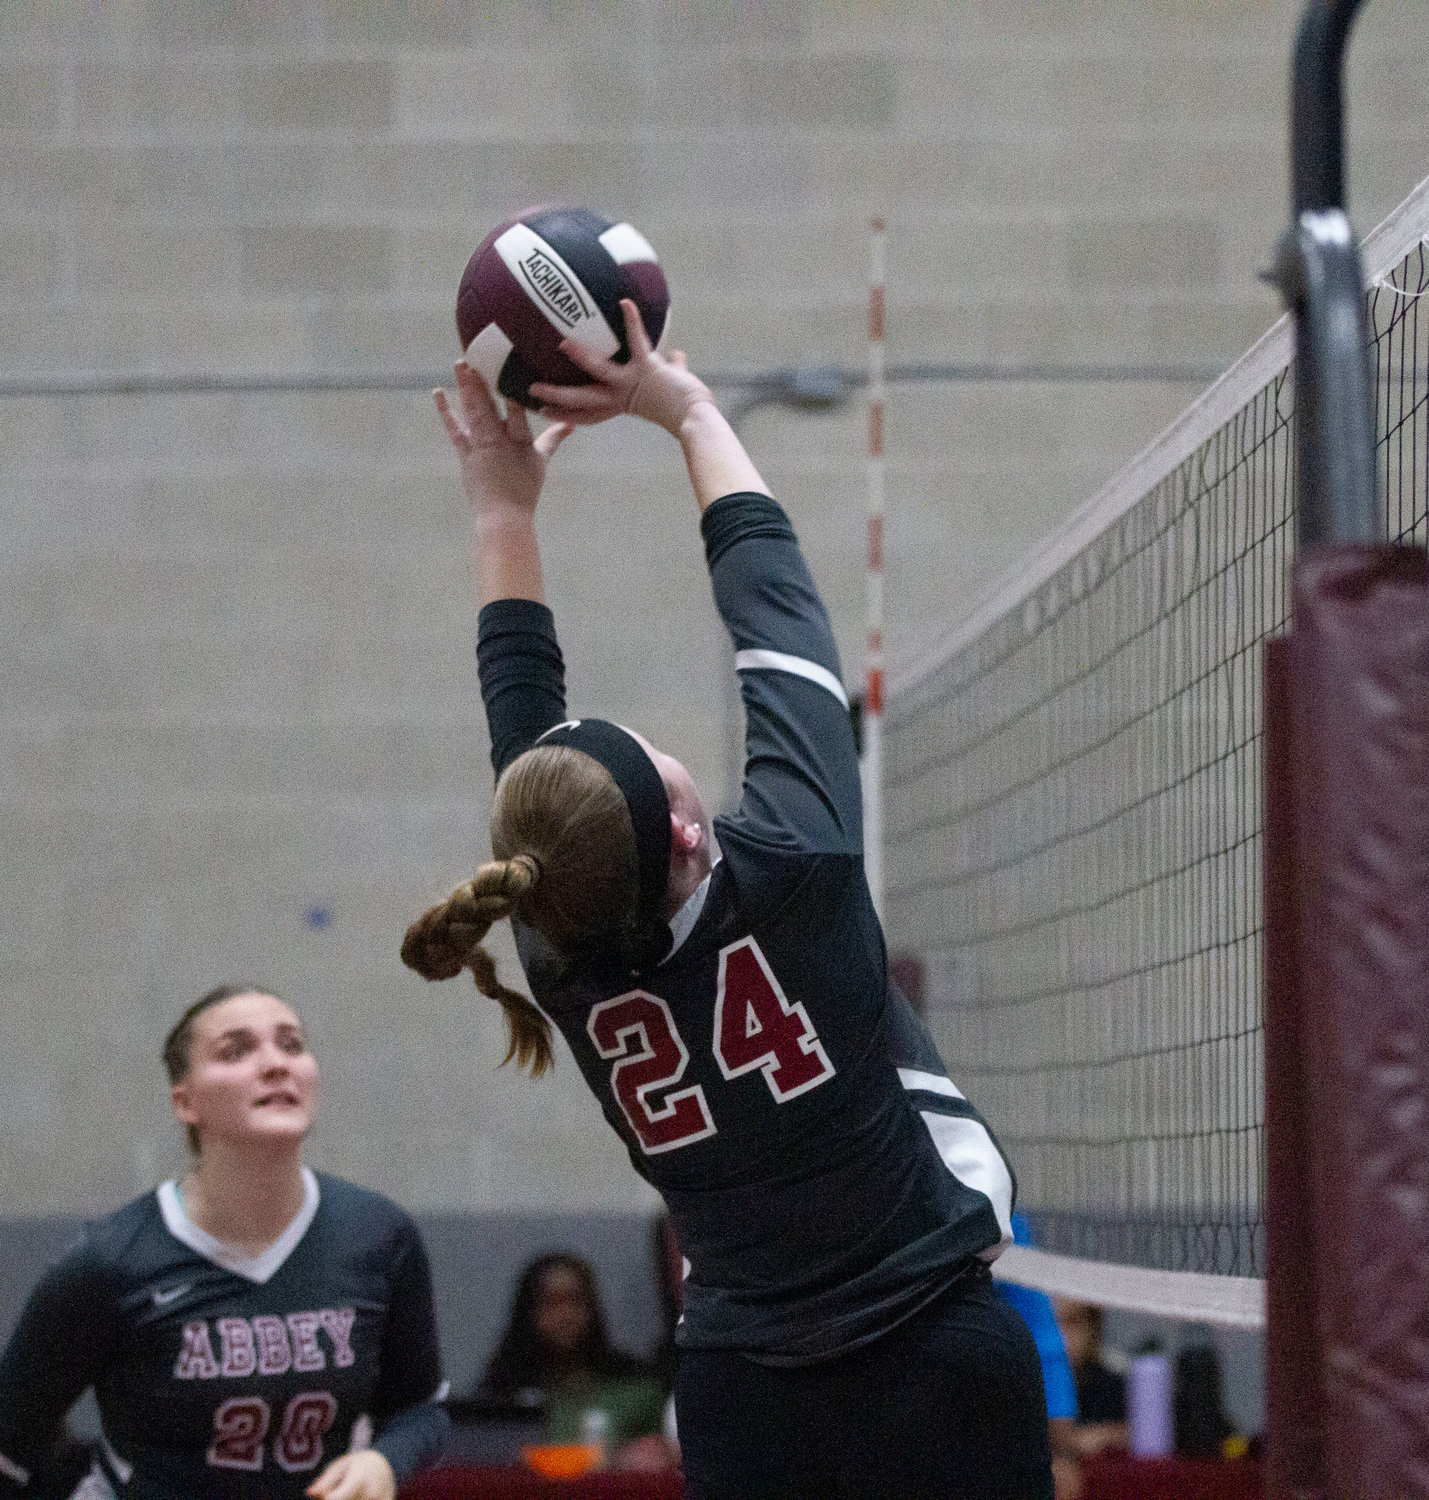 Bailey Howell of Westport volleys the ball back over the net during the first set.